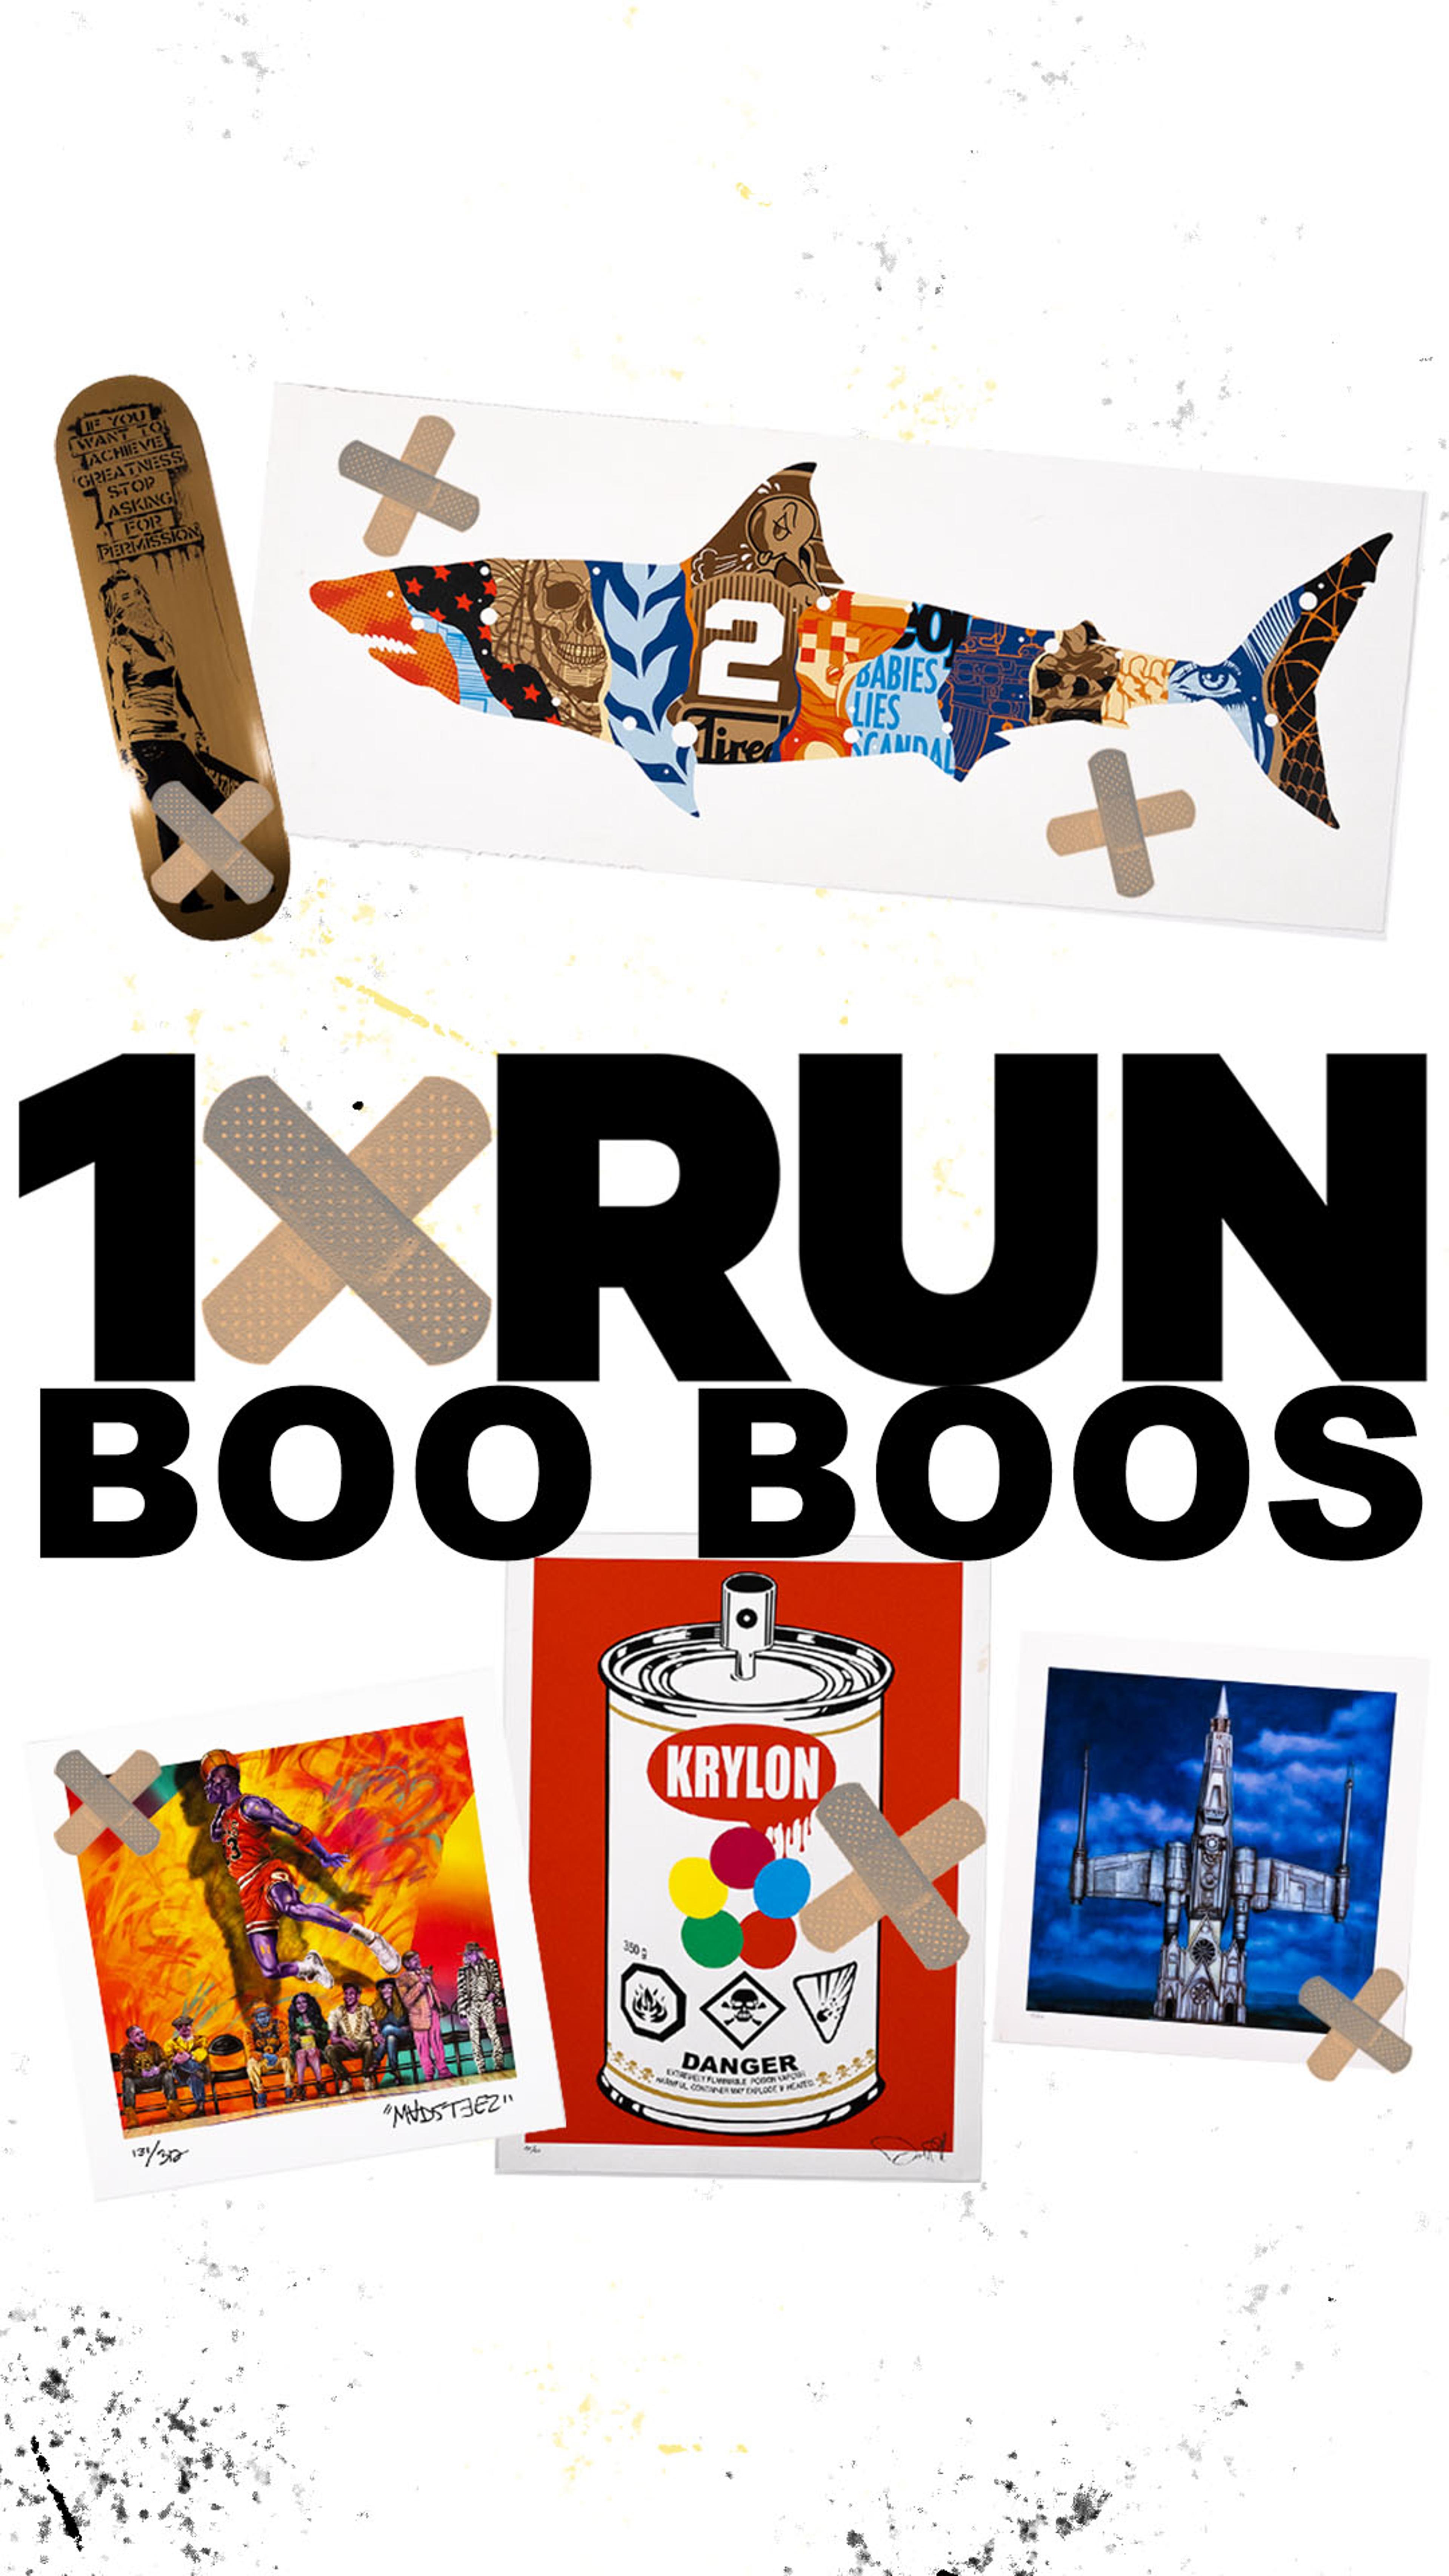 Preview image for the show titled "1XRUN Boo Boo's Auction" at Today @ 7:00 PM